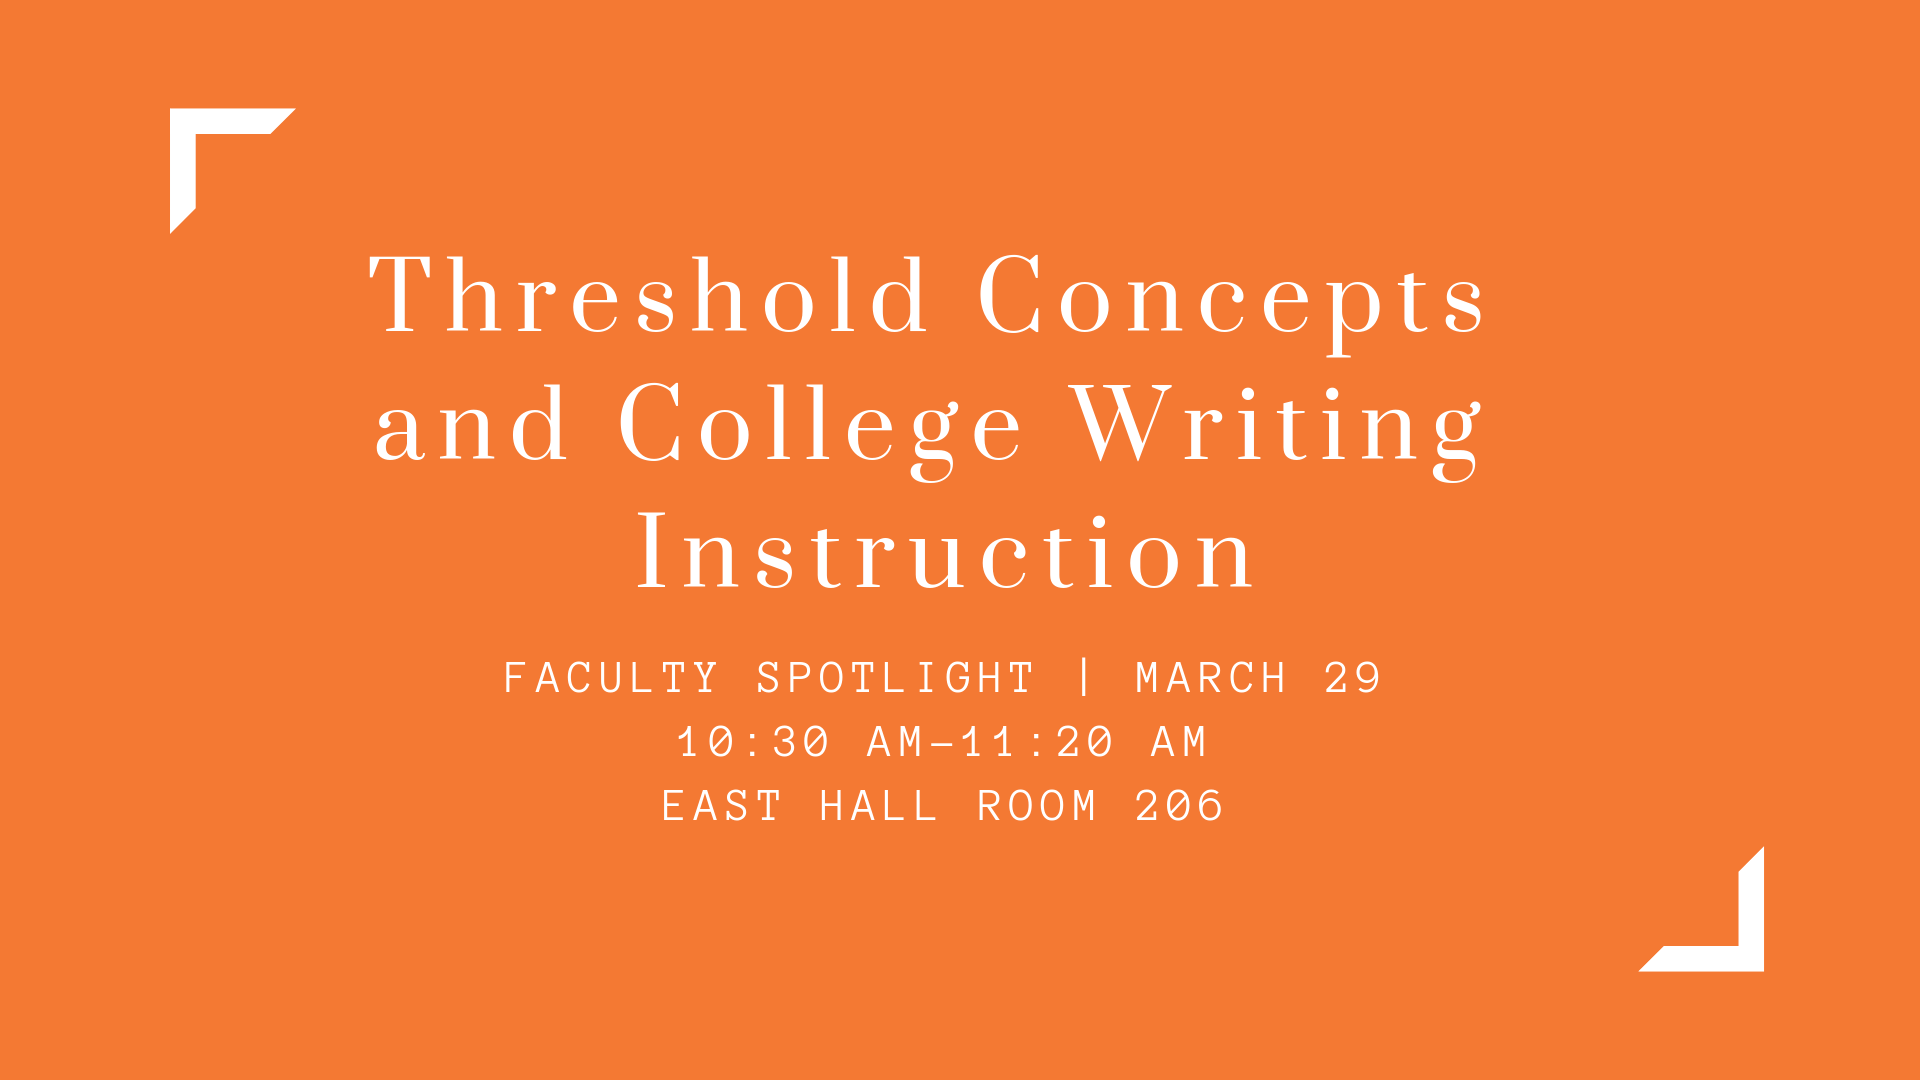 Threshold concepts and college writing instruction